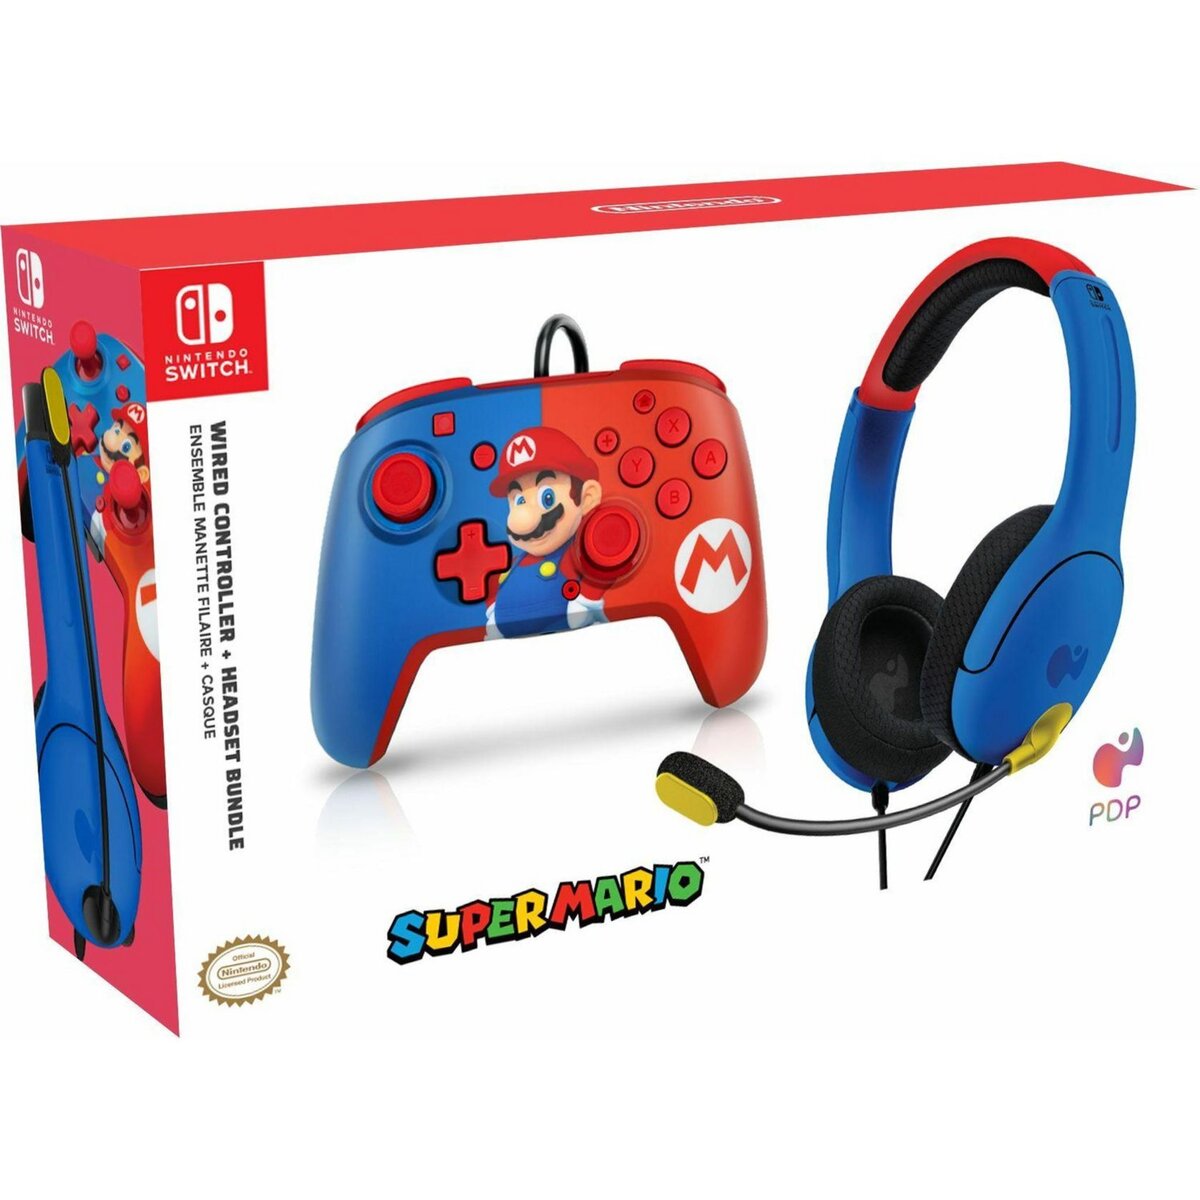 PDP Pack Casque Gaming + Manette Super Mario Nintendo Switch pas cher 